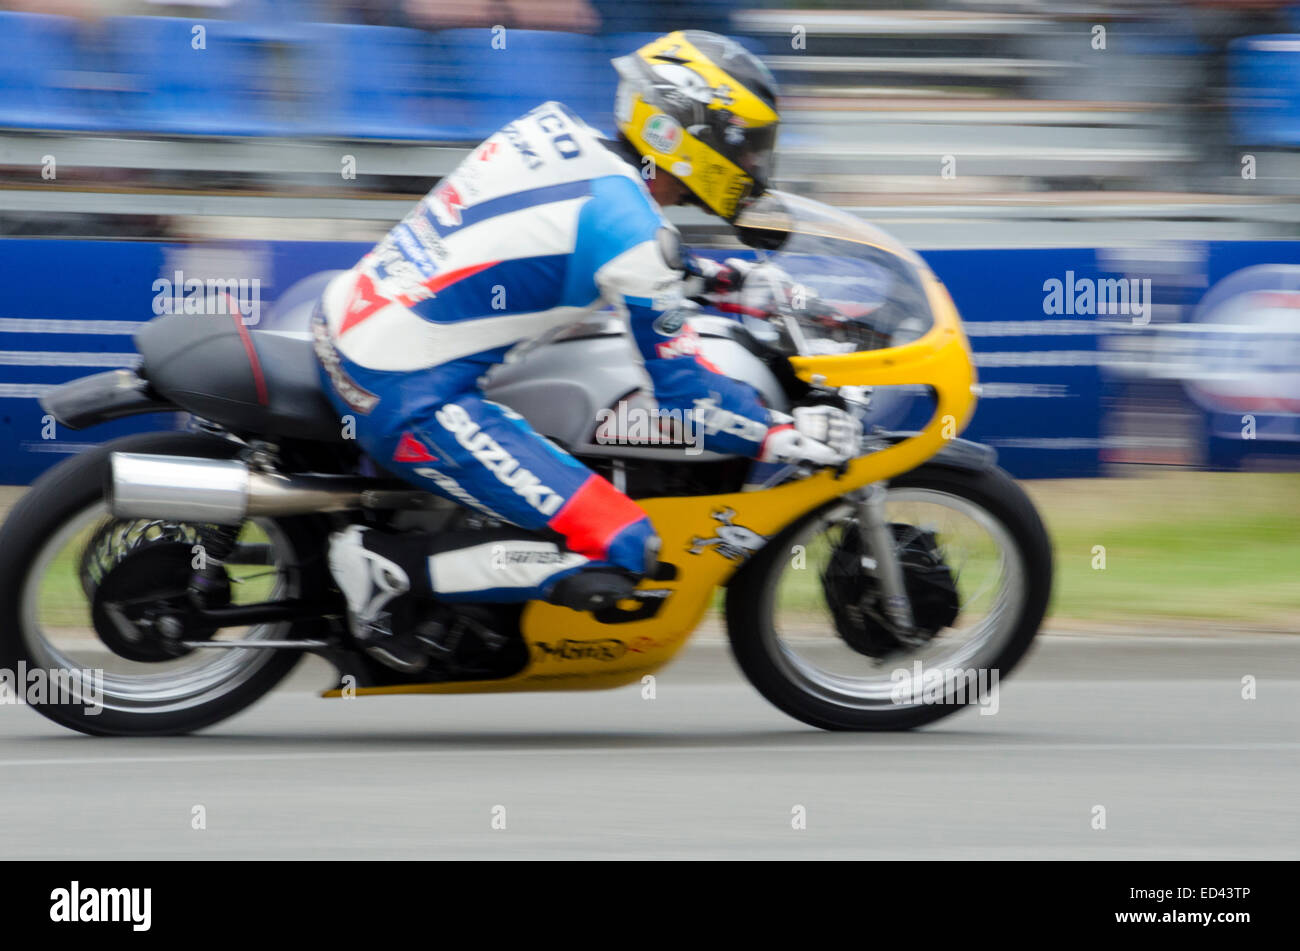 Wanganui, New Zealand. 26th Dec, 2014. Guy Martin , UK TV presenter and motorcycle racer, won the classic solo race at the annual Boxing Day “Cemetery Circuit” event in Wanganui, New Zealand on 26 December 2014 on his vintage Manx Norton bike.  The race is part of the Suzuki Series of motorcycle racing held every summer in New Zealand.  It is an exciting day of street racing on a tight one-mile street circuit around the old town cemetery in downtown Wanganui . Credit:  Geoff  Marshall/Alamy Live News Stock Photo